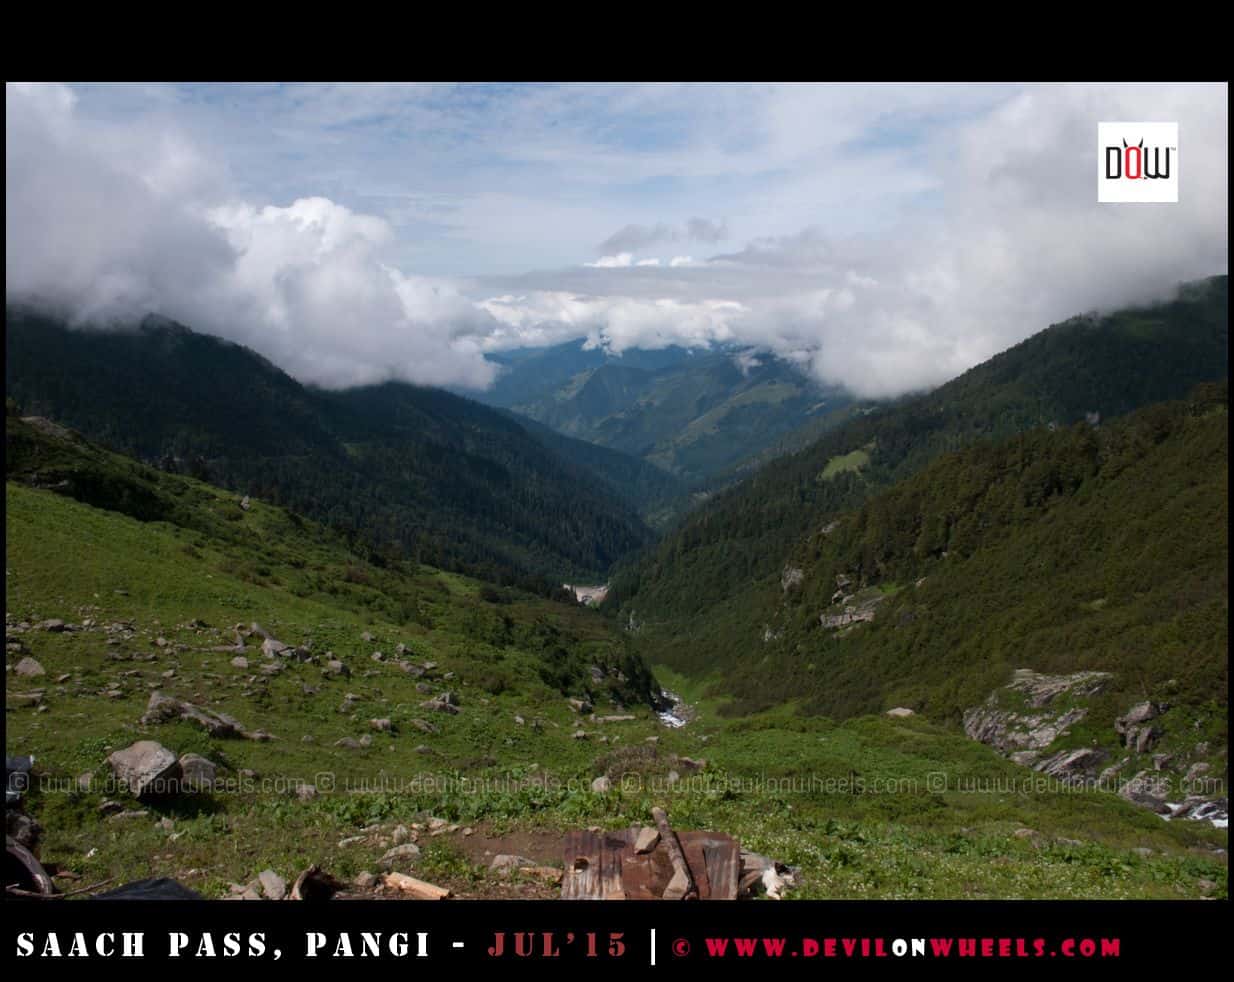 That amazing valley view from Satrundi